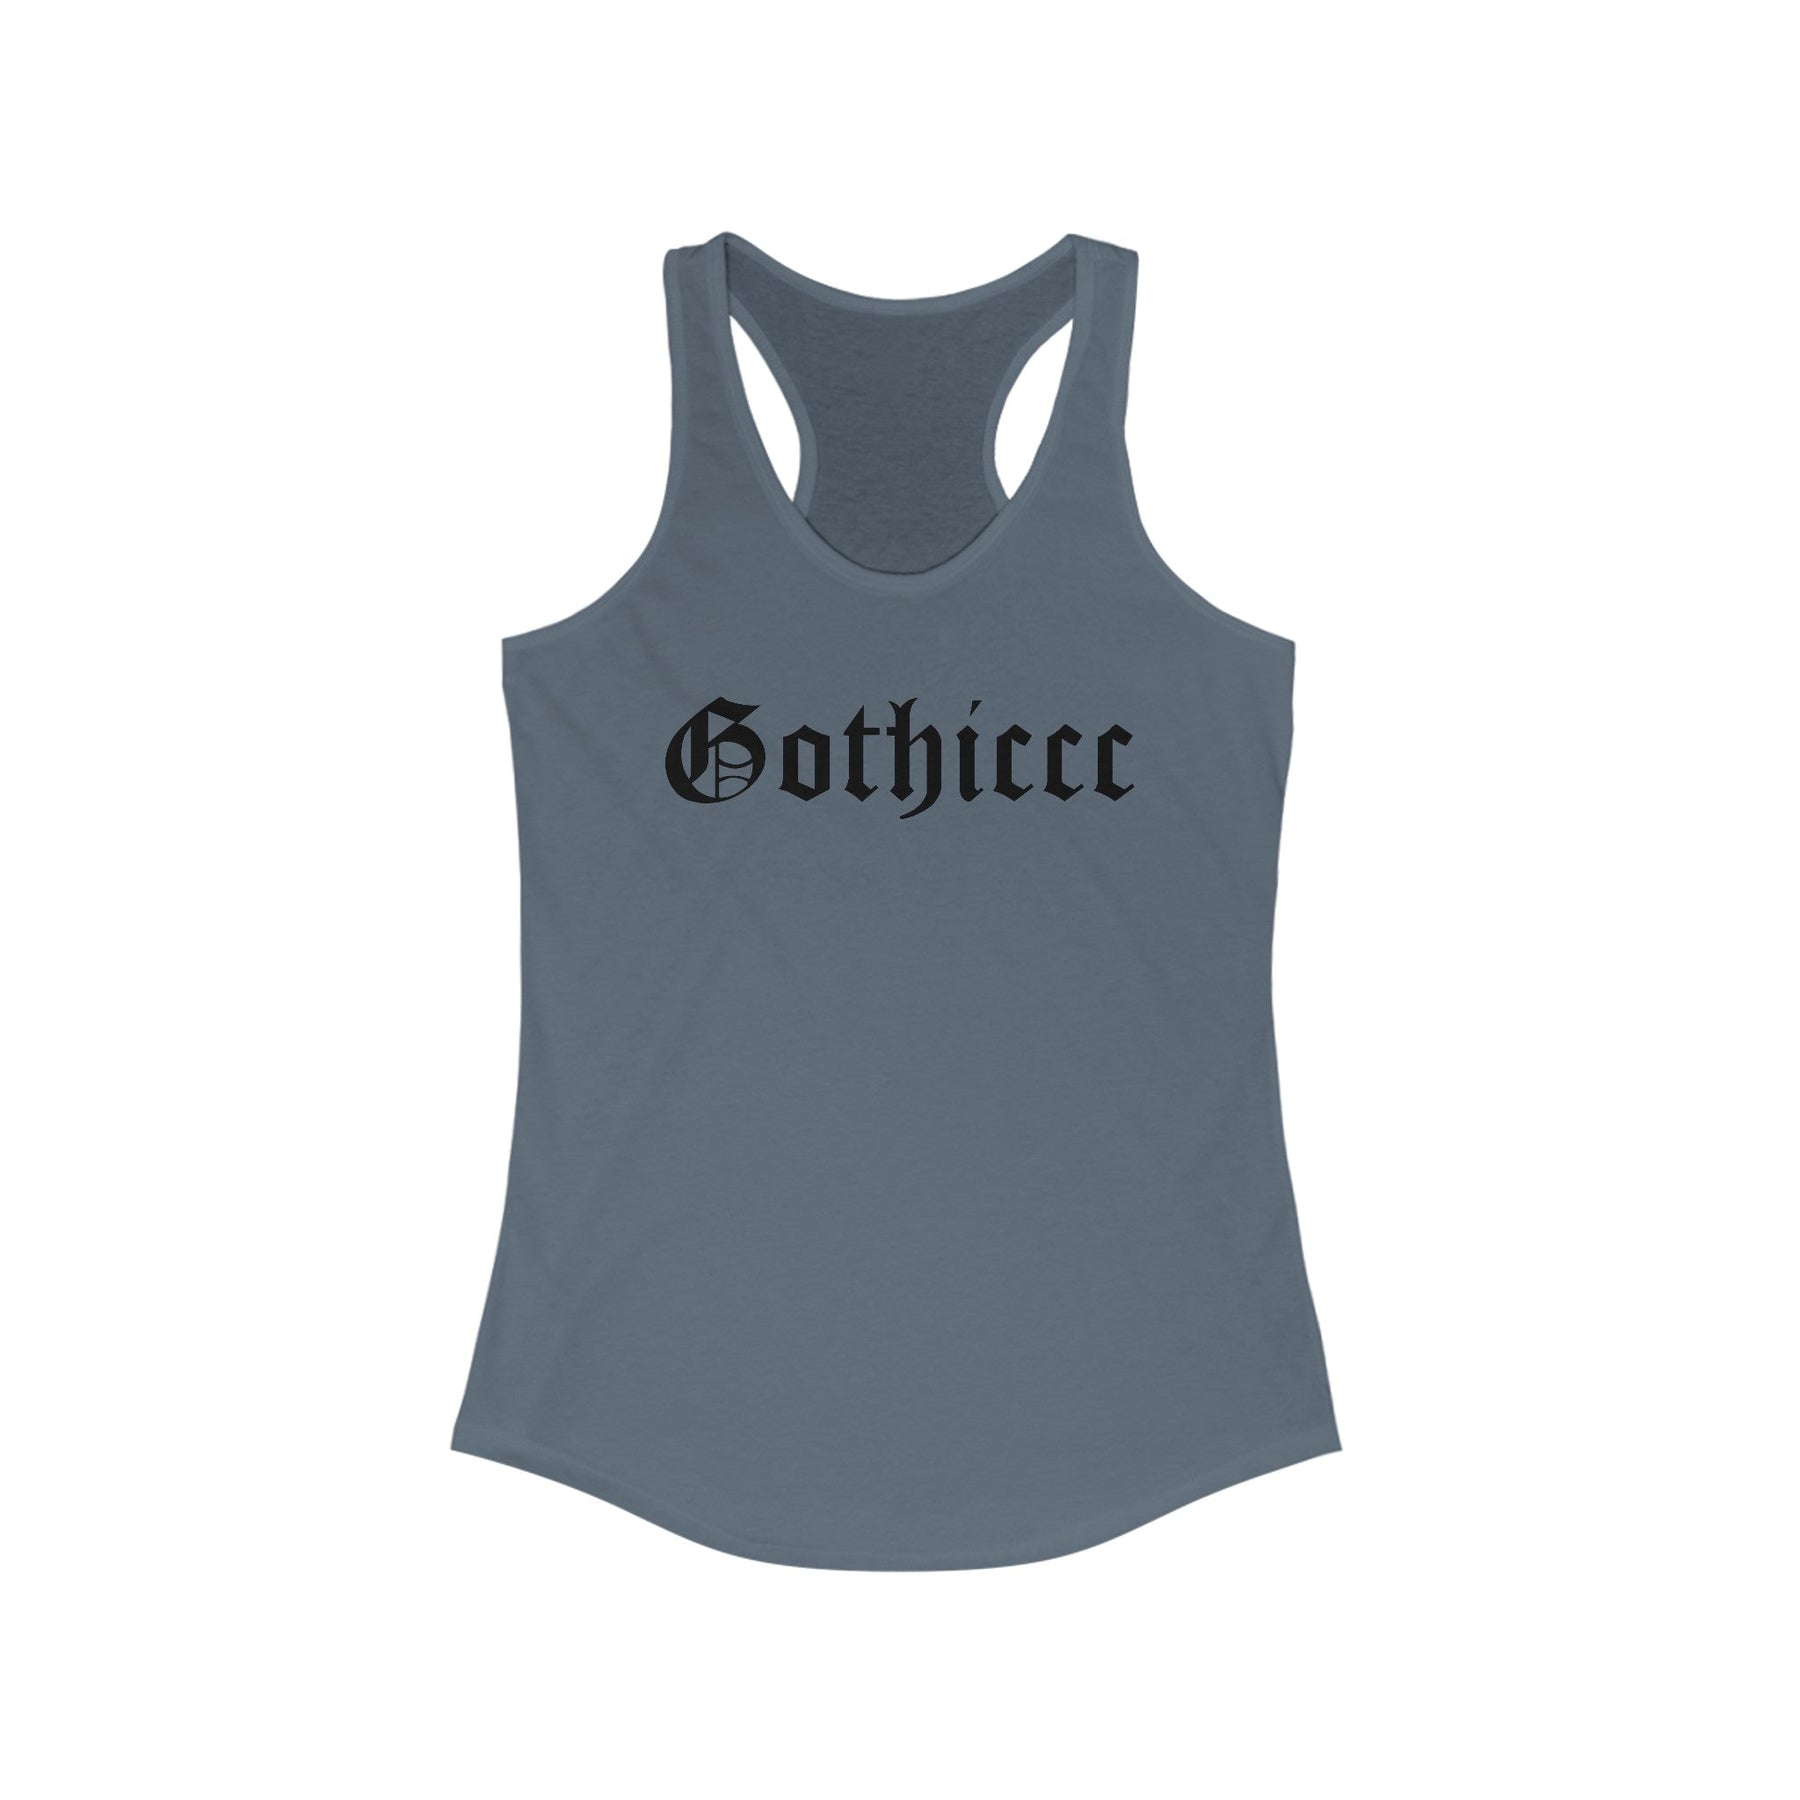 Gothiccc Women's Racerback Tank - Goth Cloth Co.Tank Top56009925044608355988